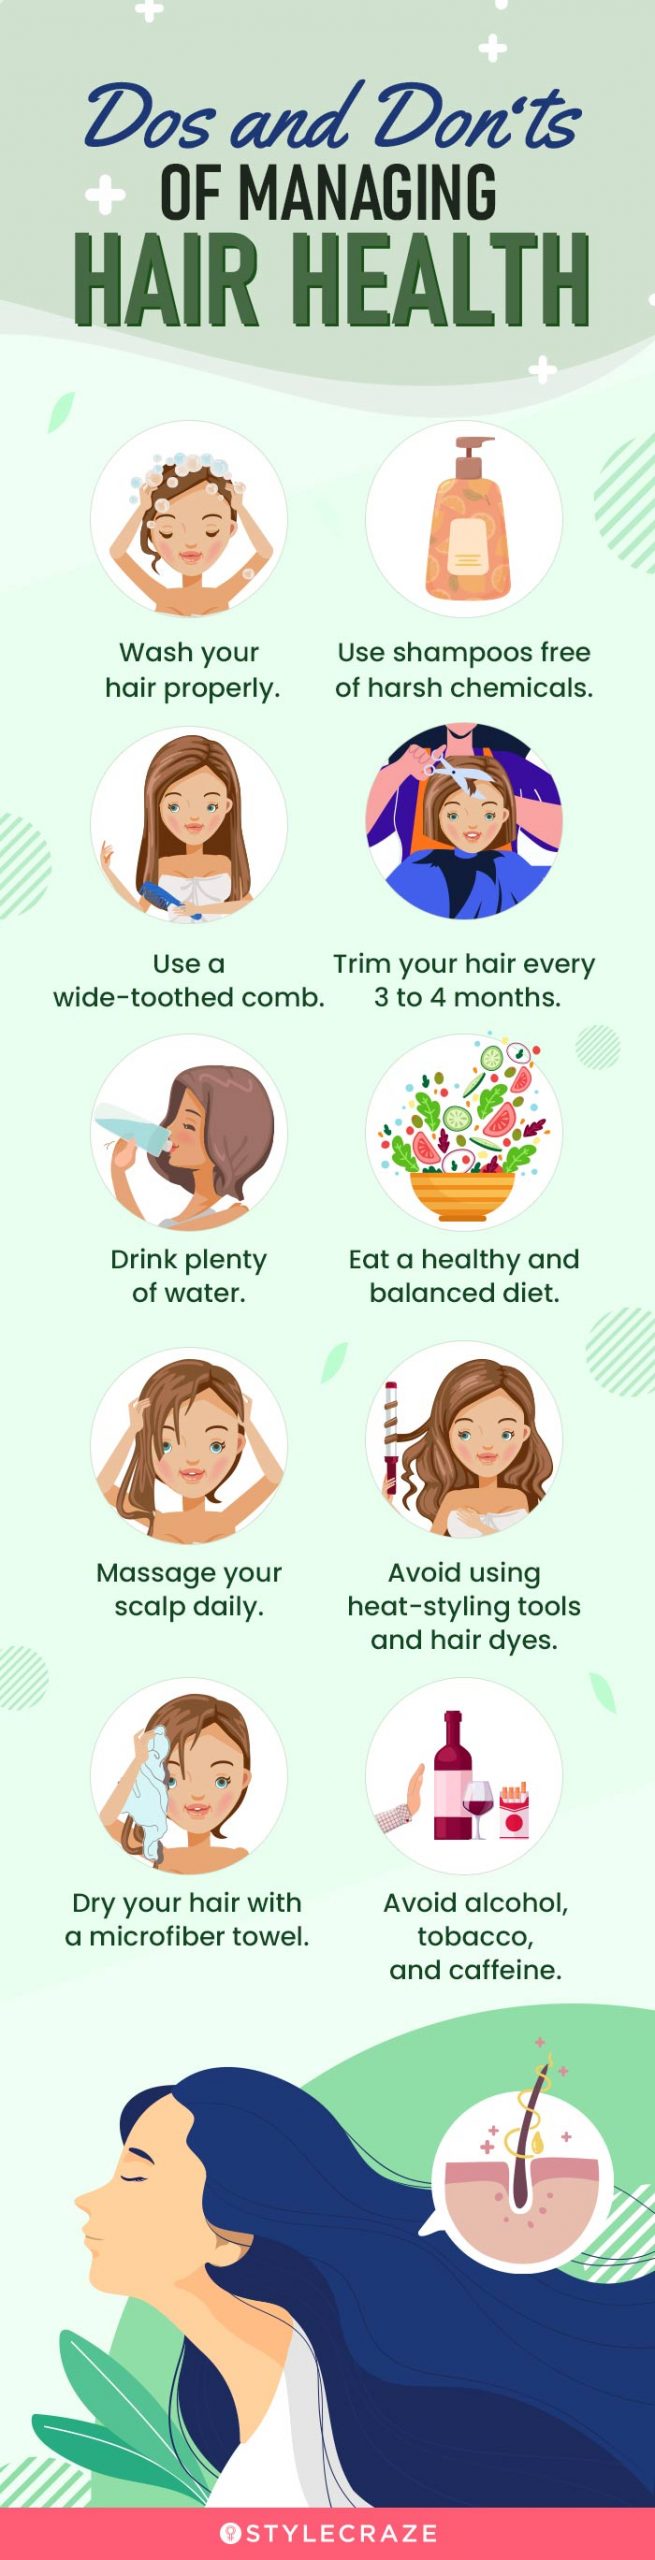 do's and don'ts of managing hair health (infographic)